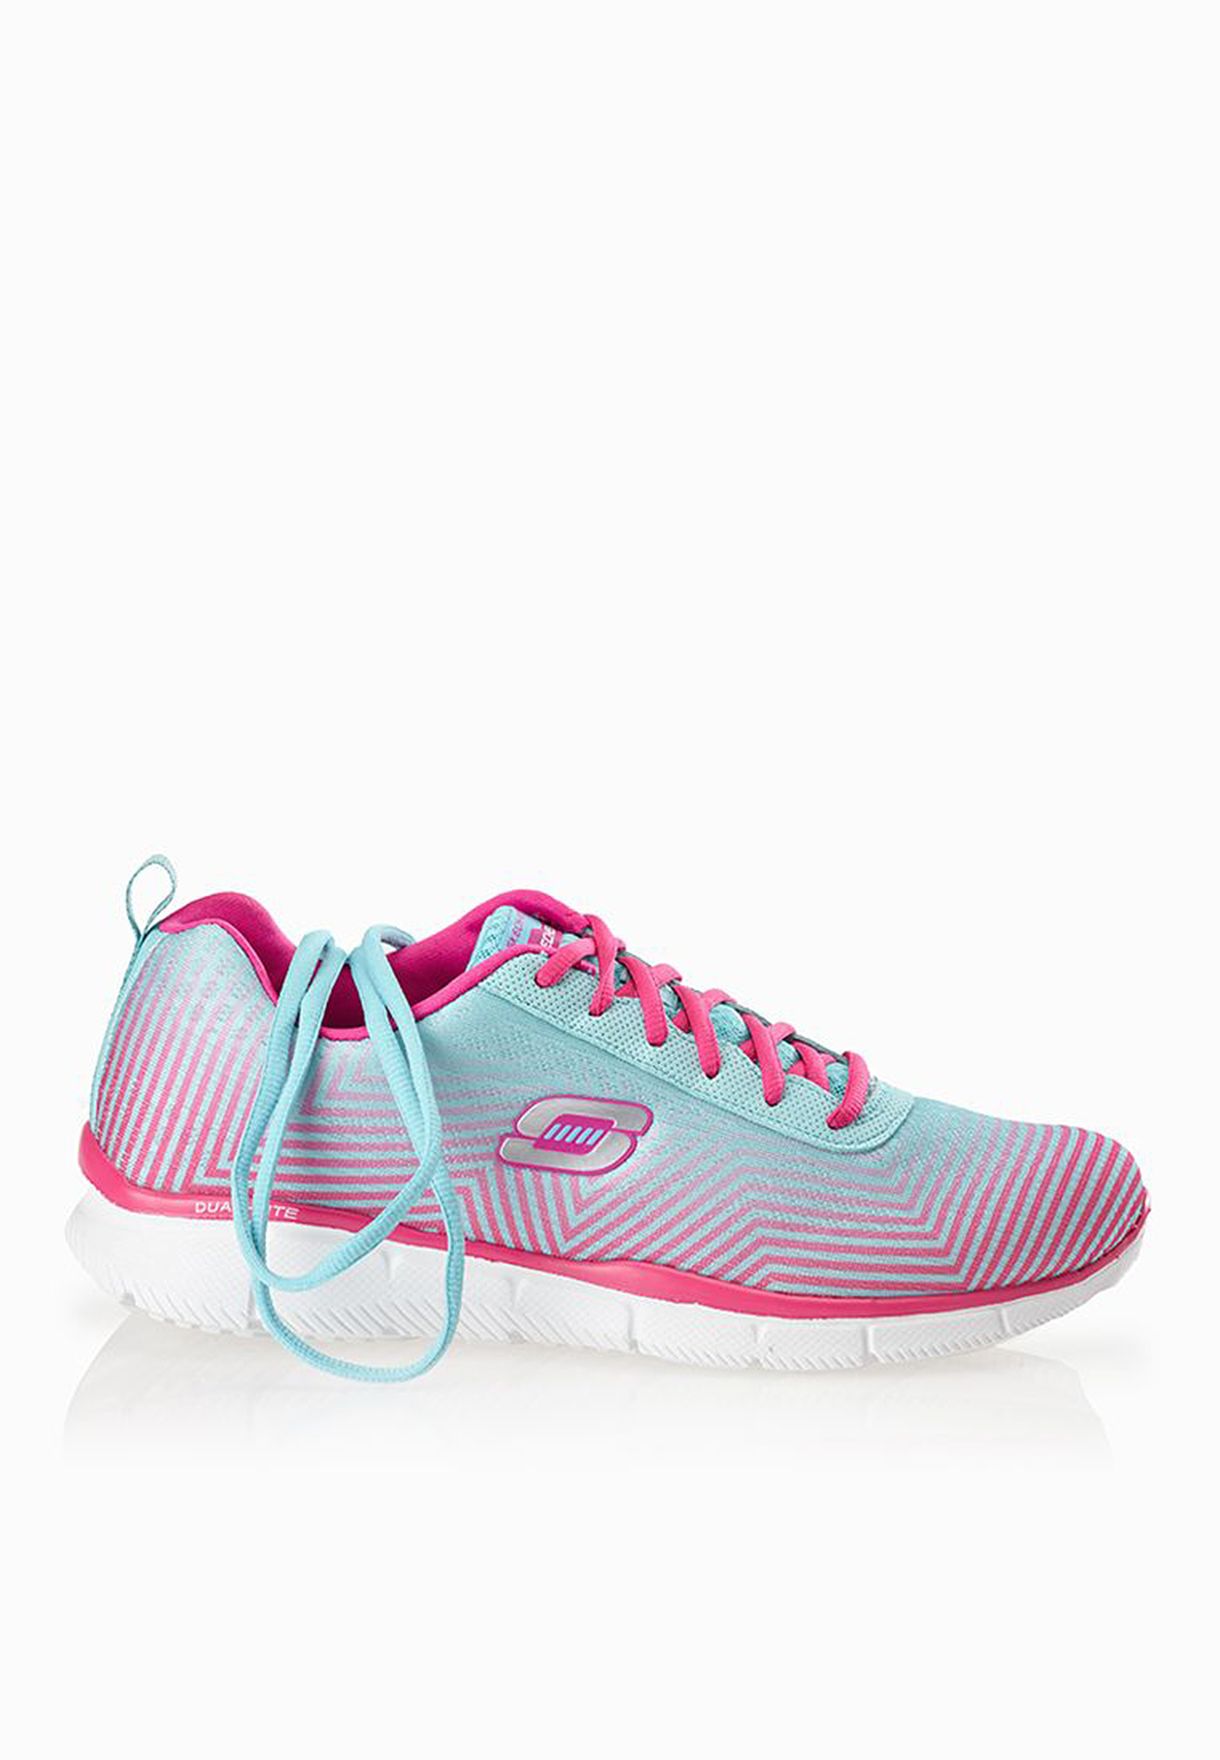 skechers women's equalizer expect miracles